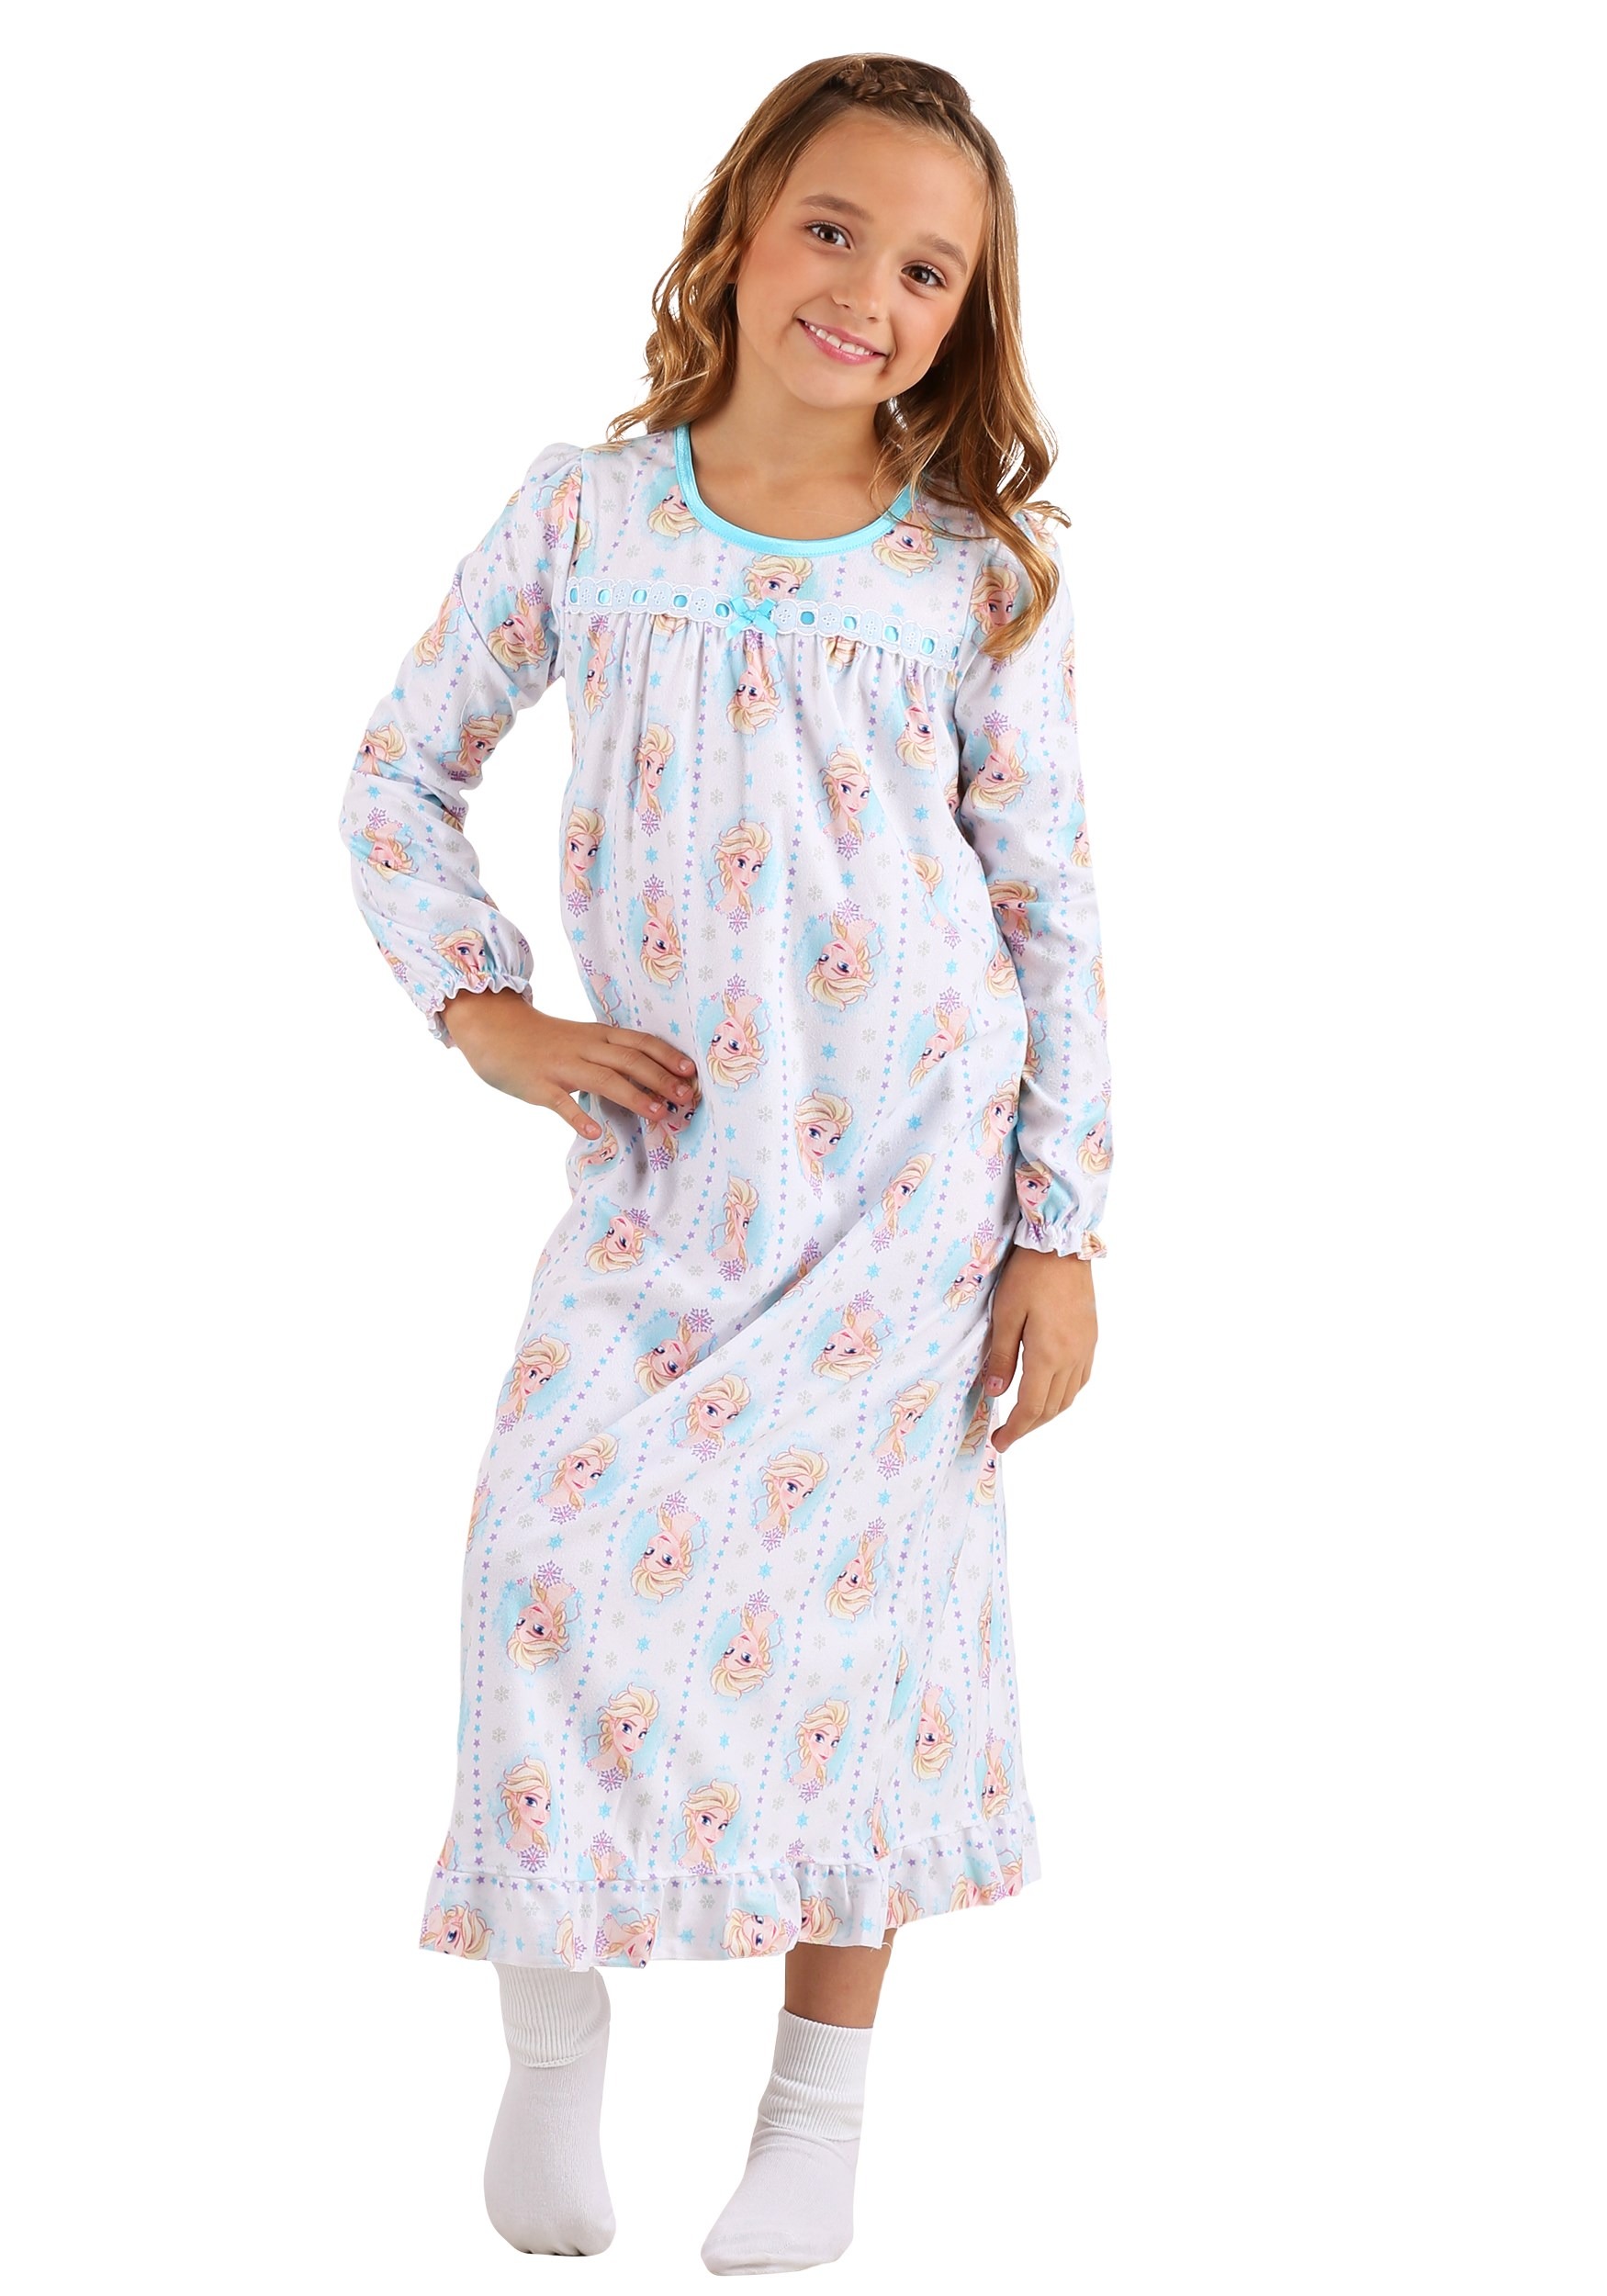 granny in night gown